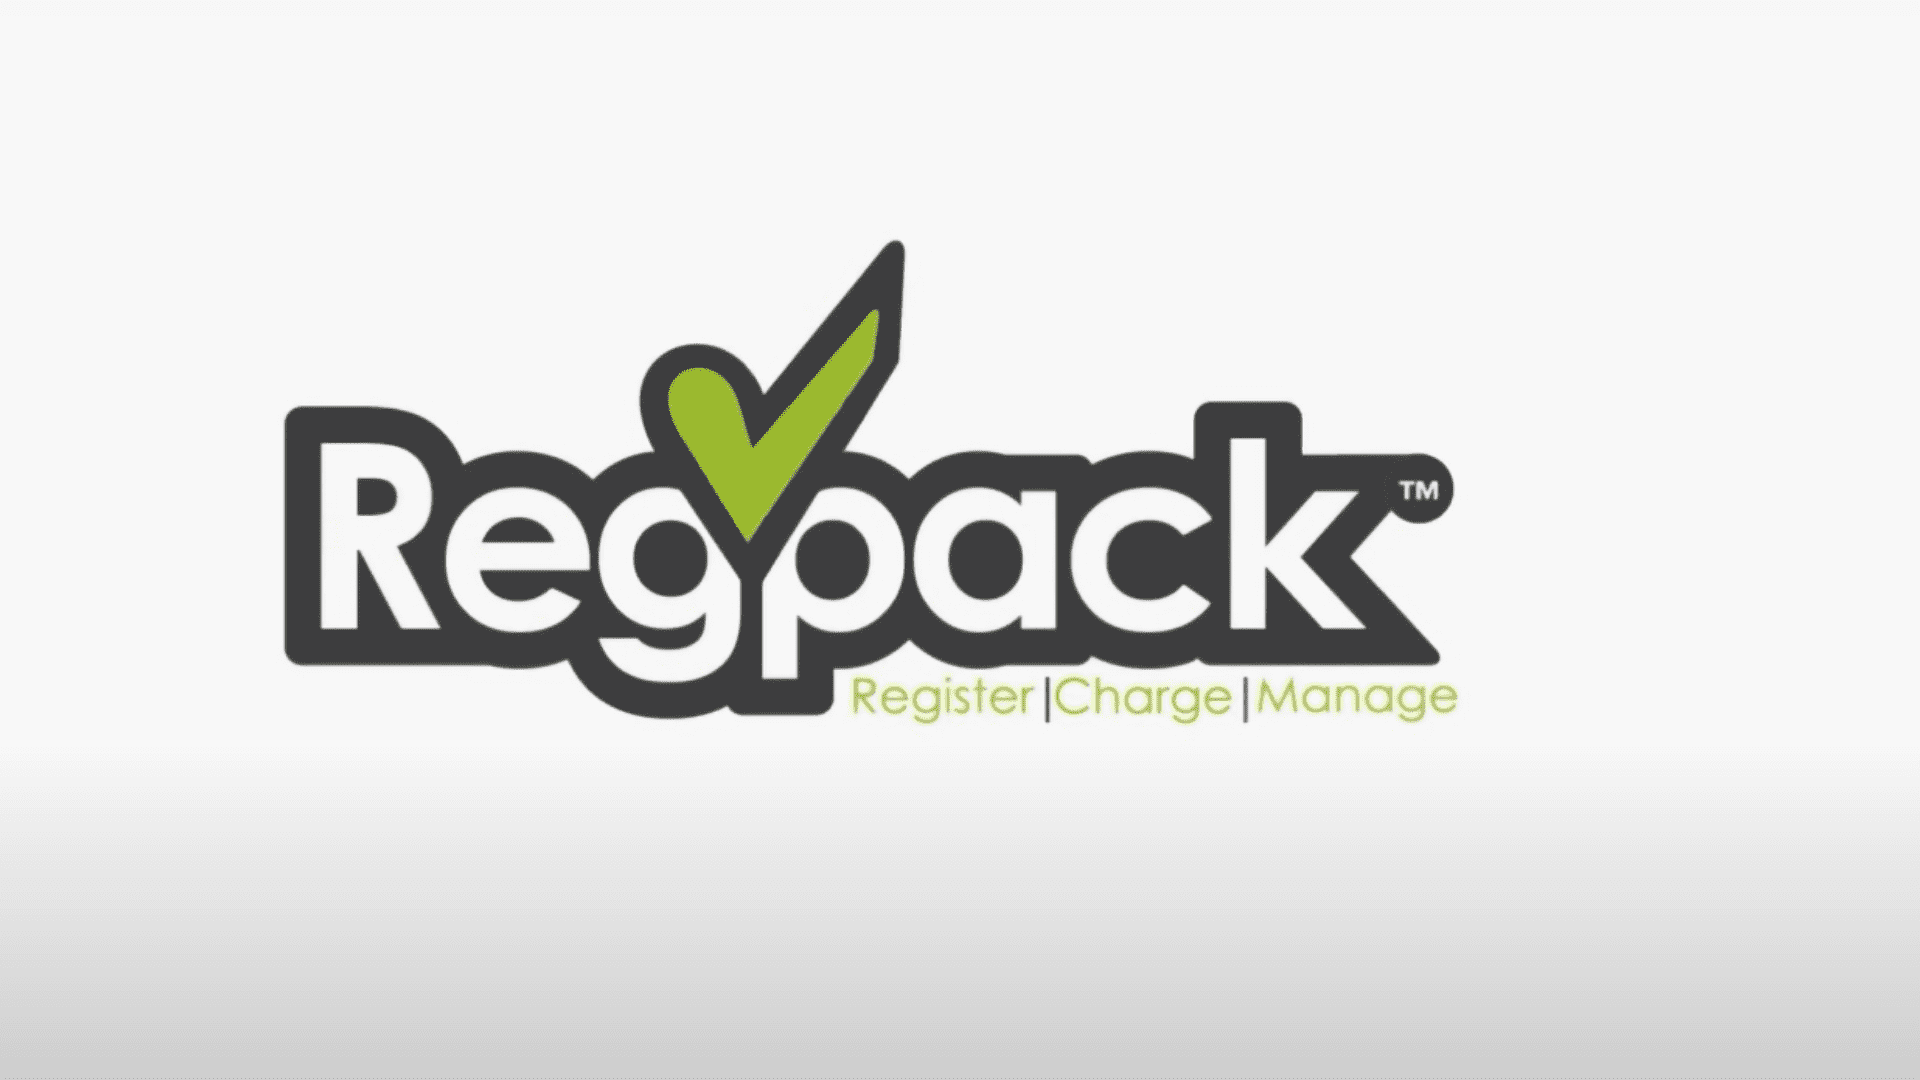 What Is Regpack? 